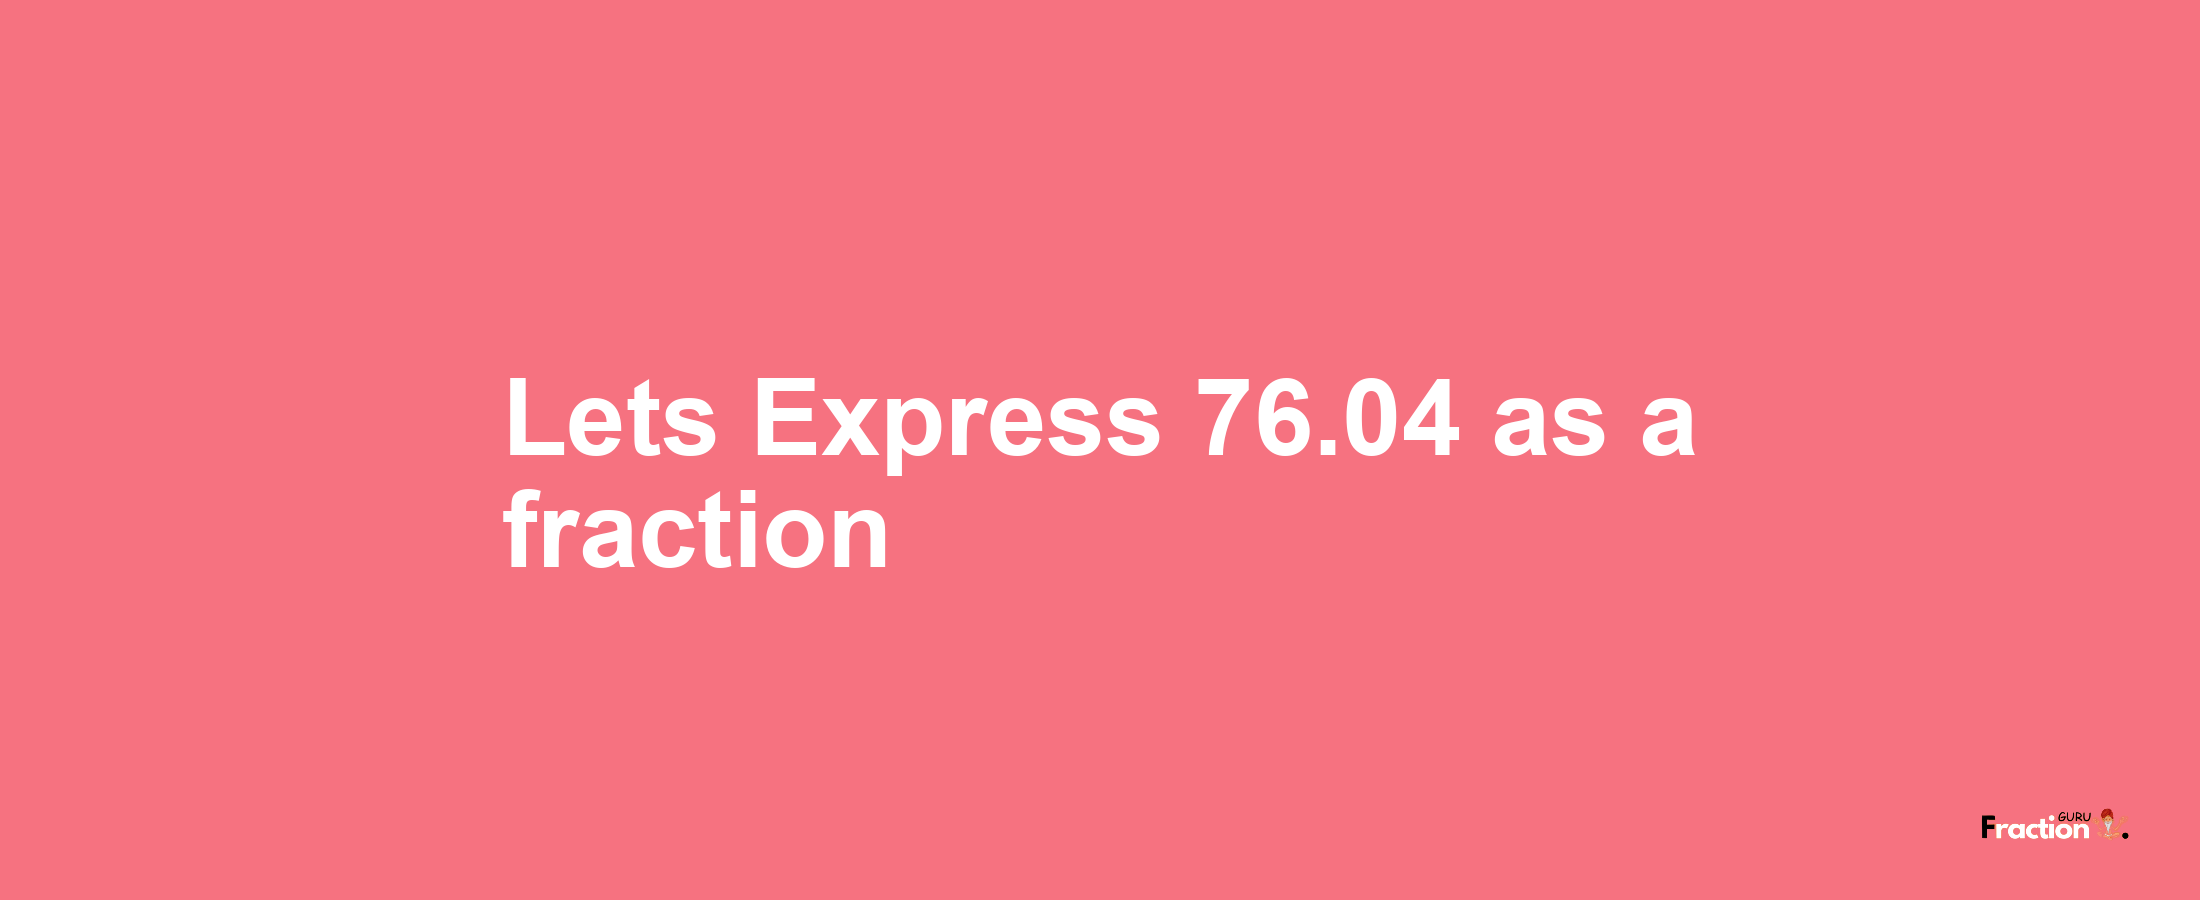 Lets Express 76.04 as afraction